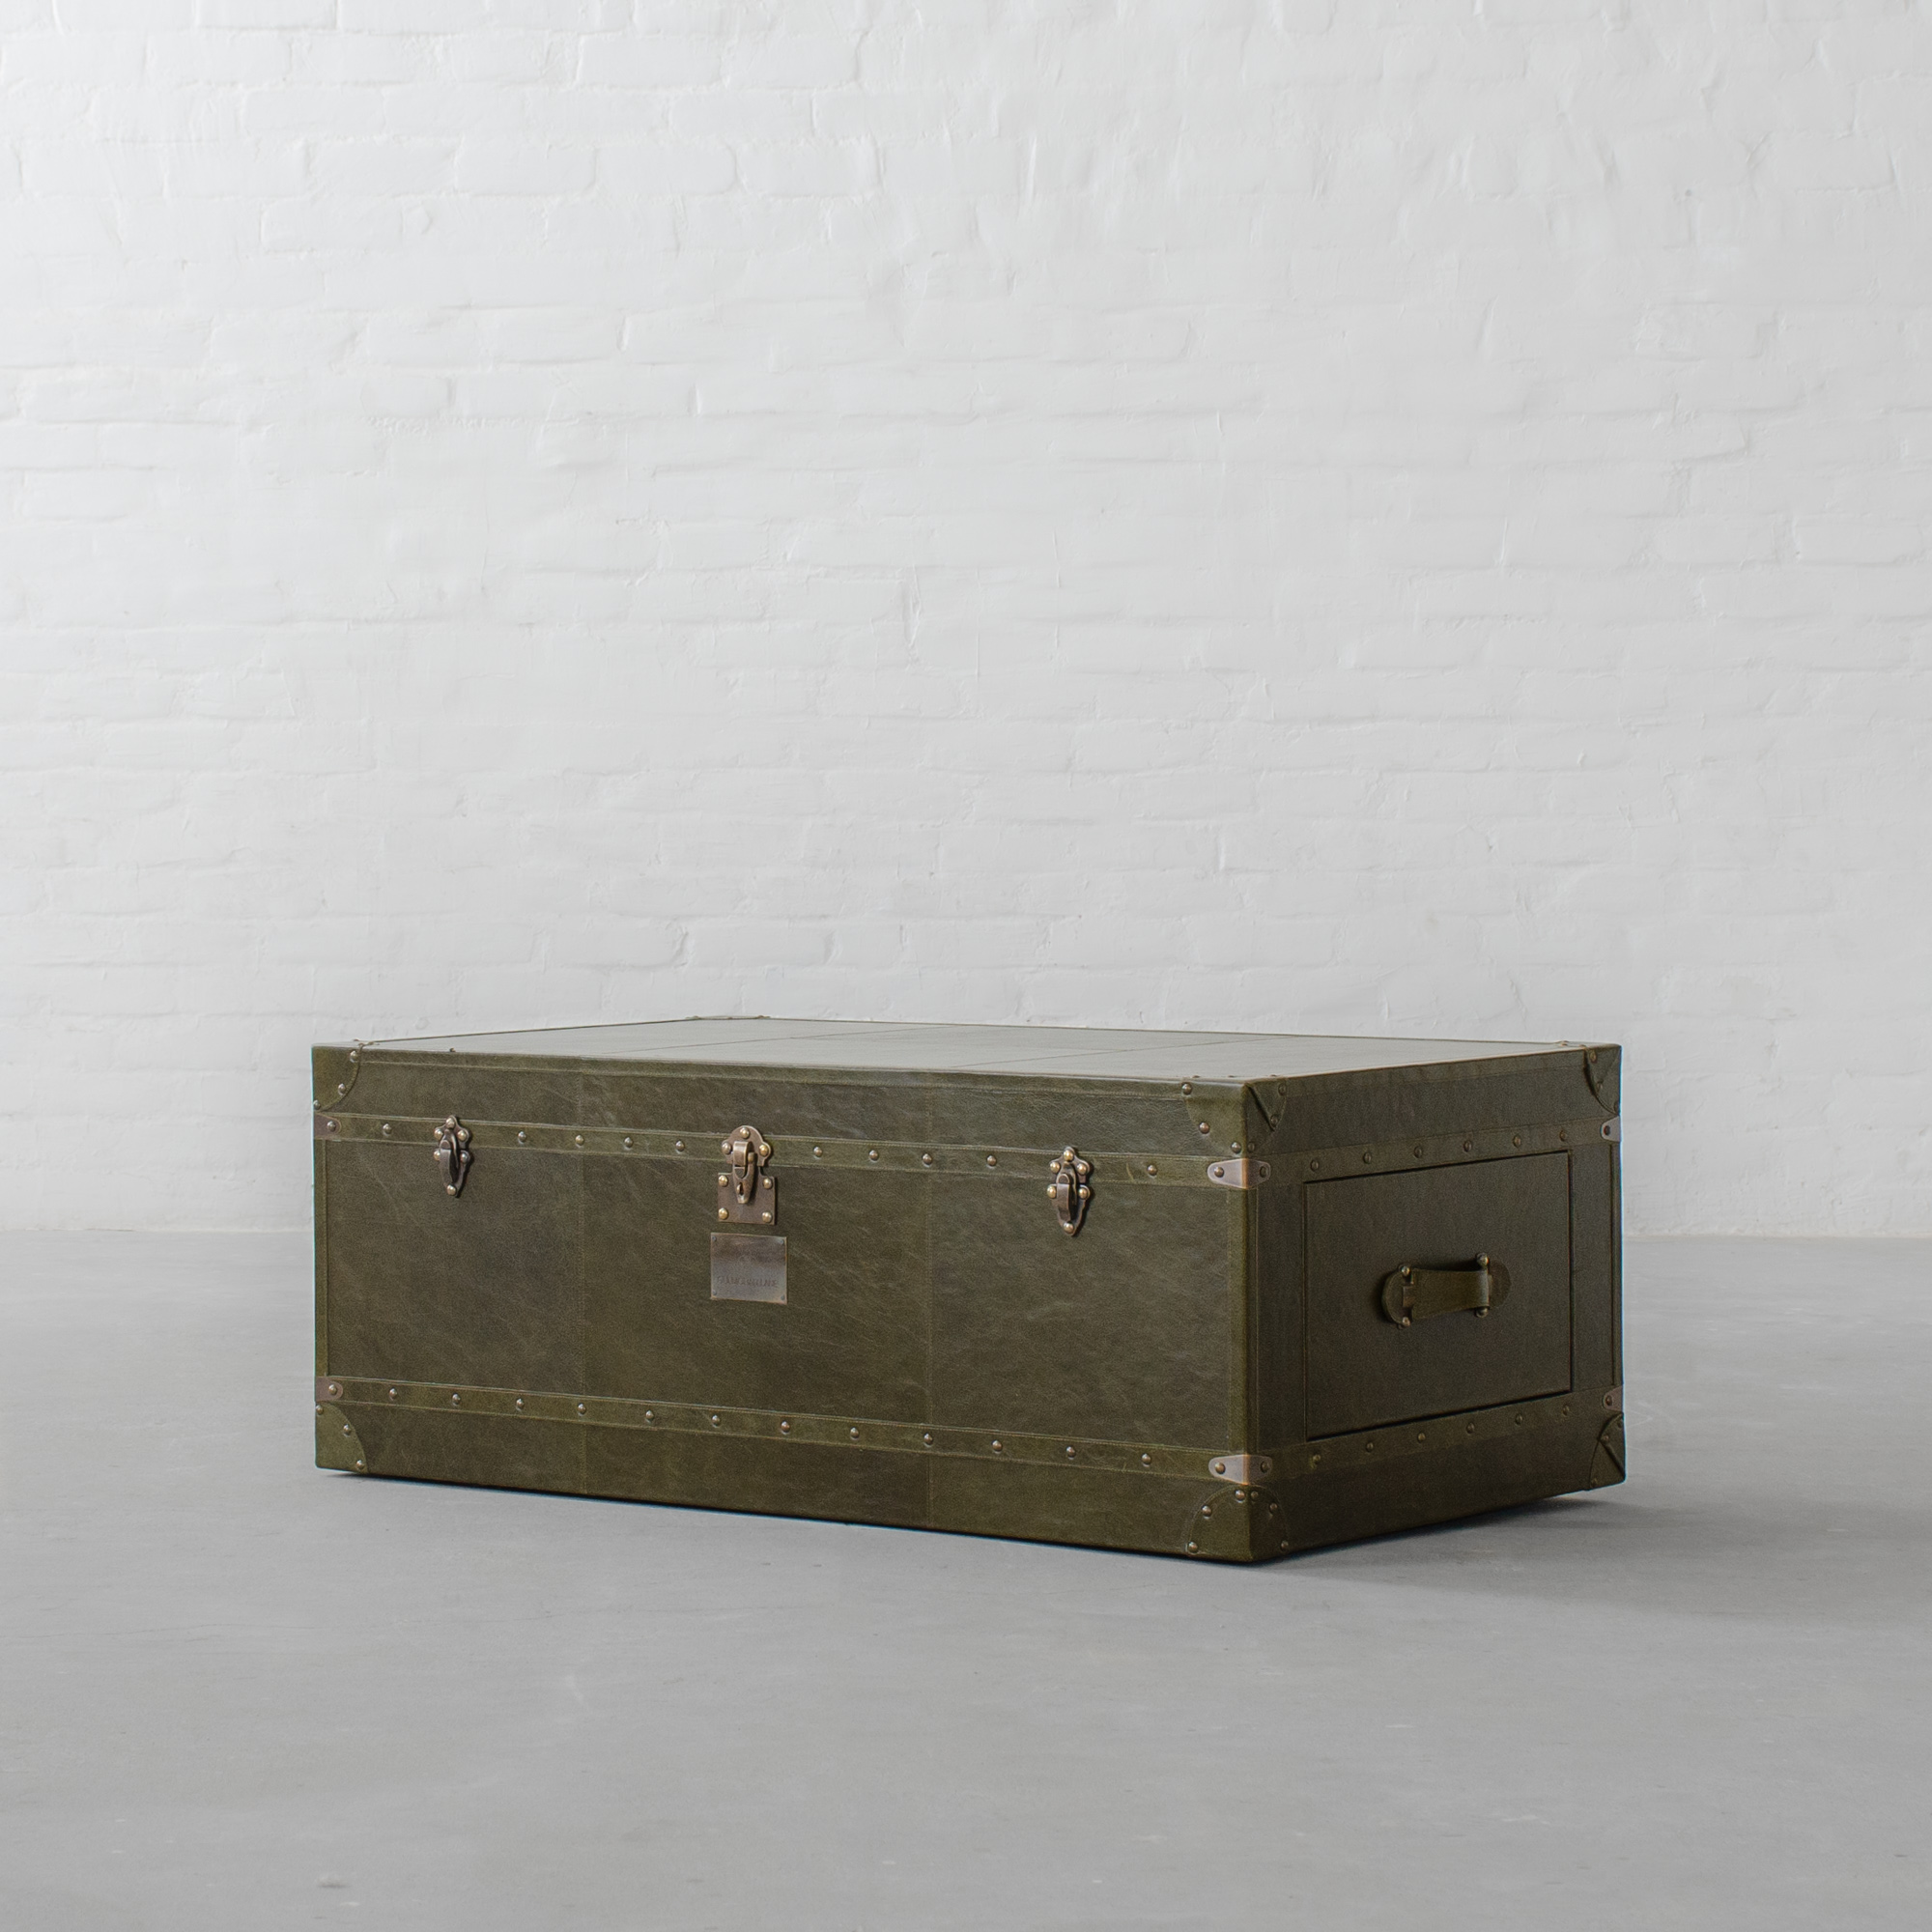 Jodhpur Leather Trunk Coffee Table, Trunk End Tables Leather